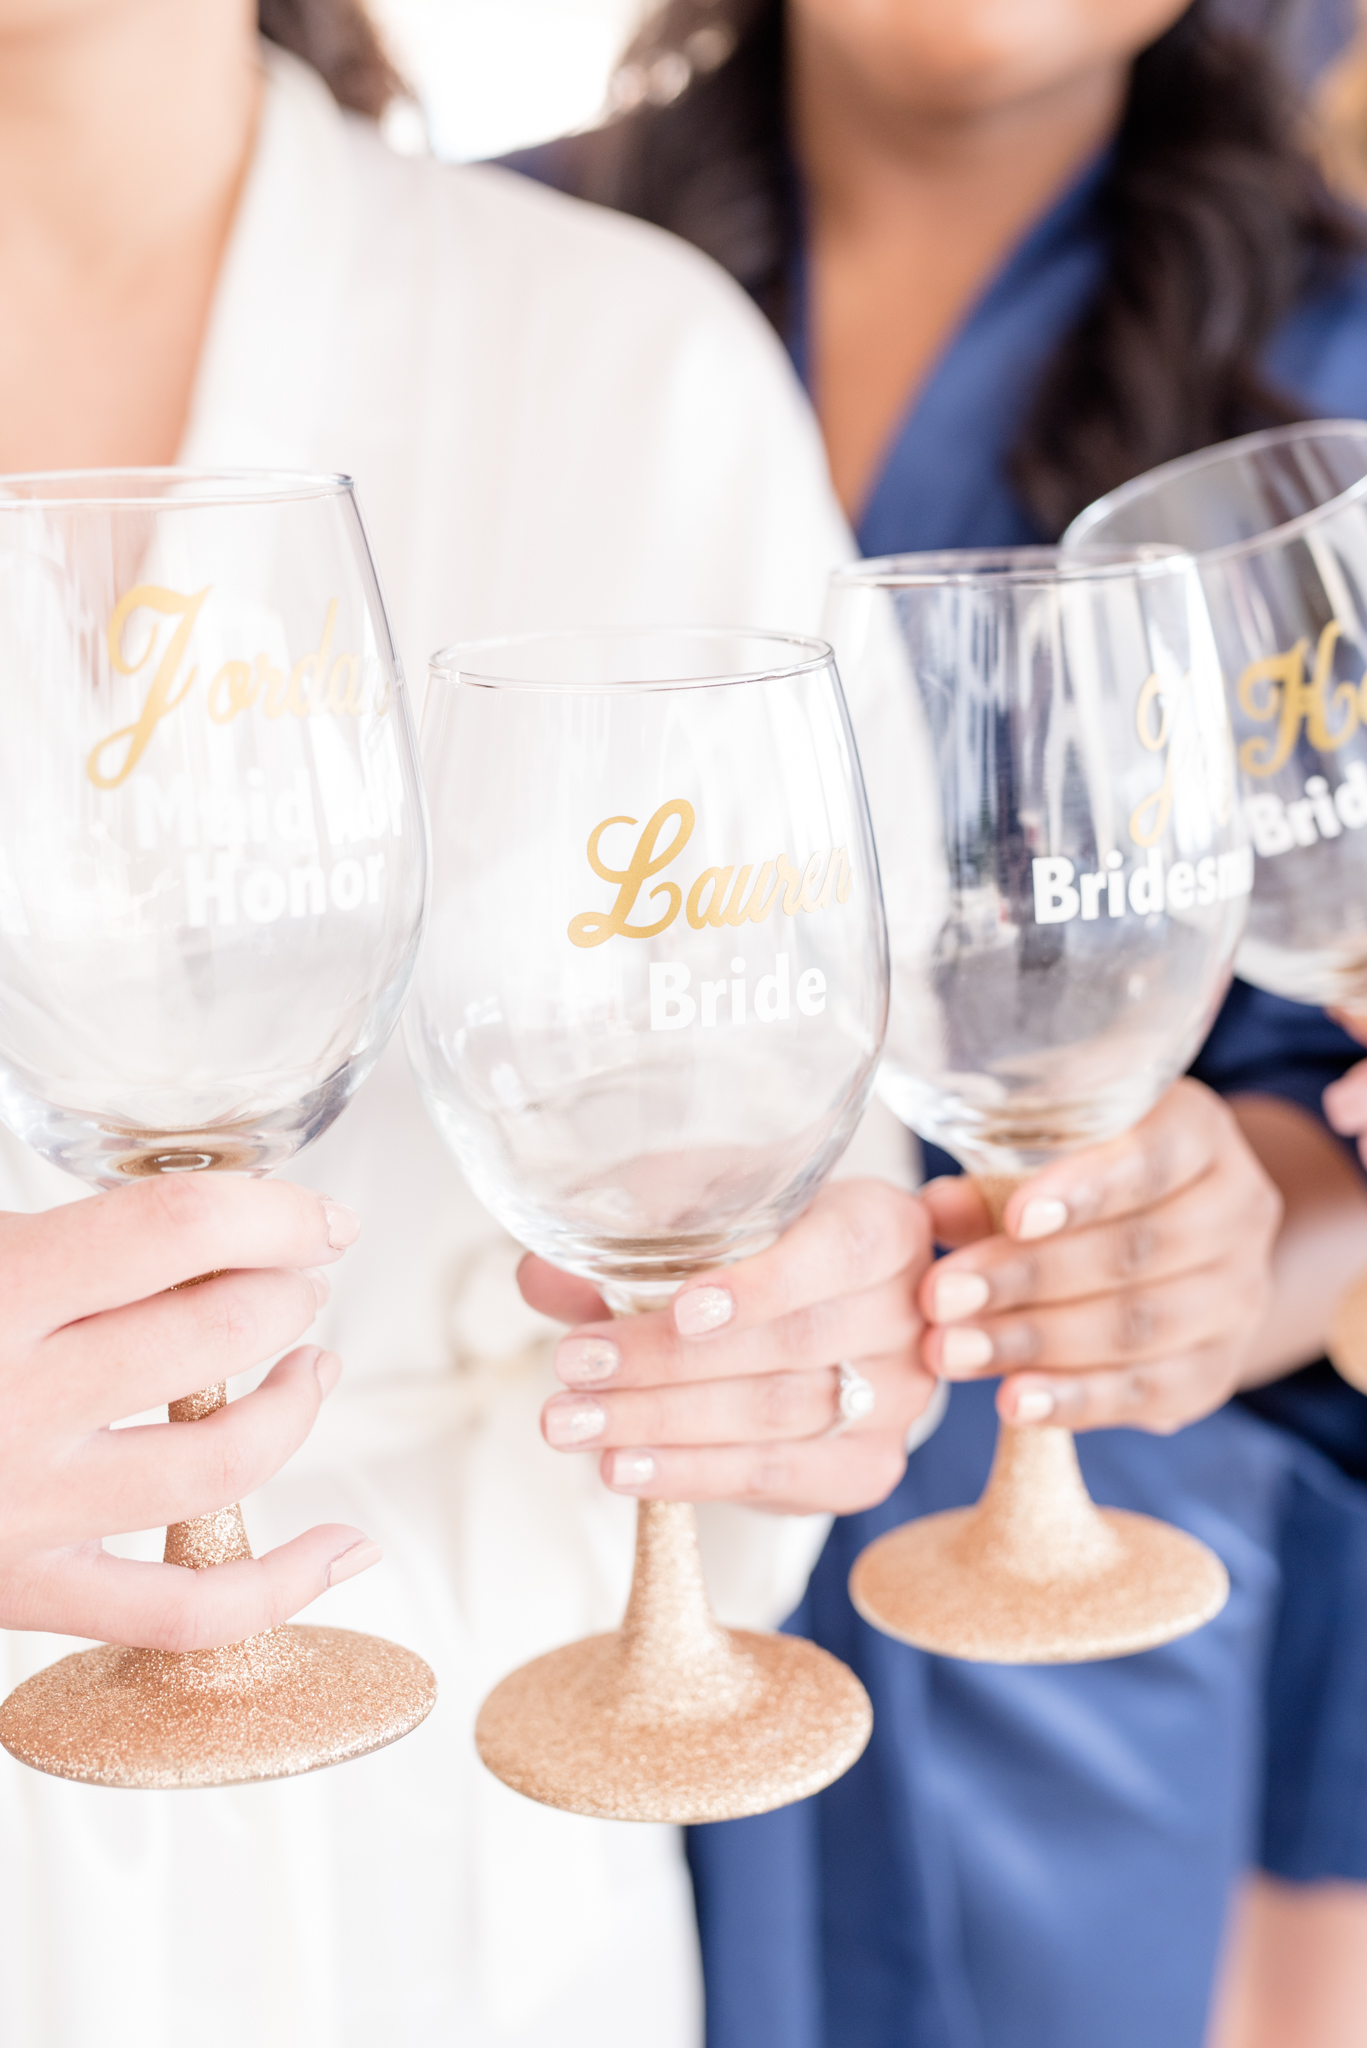 Bridal party holds personalized wine glasses